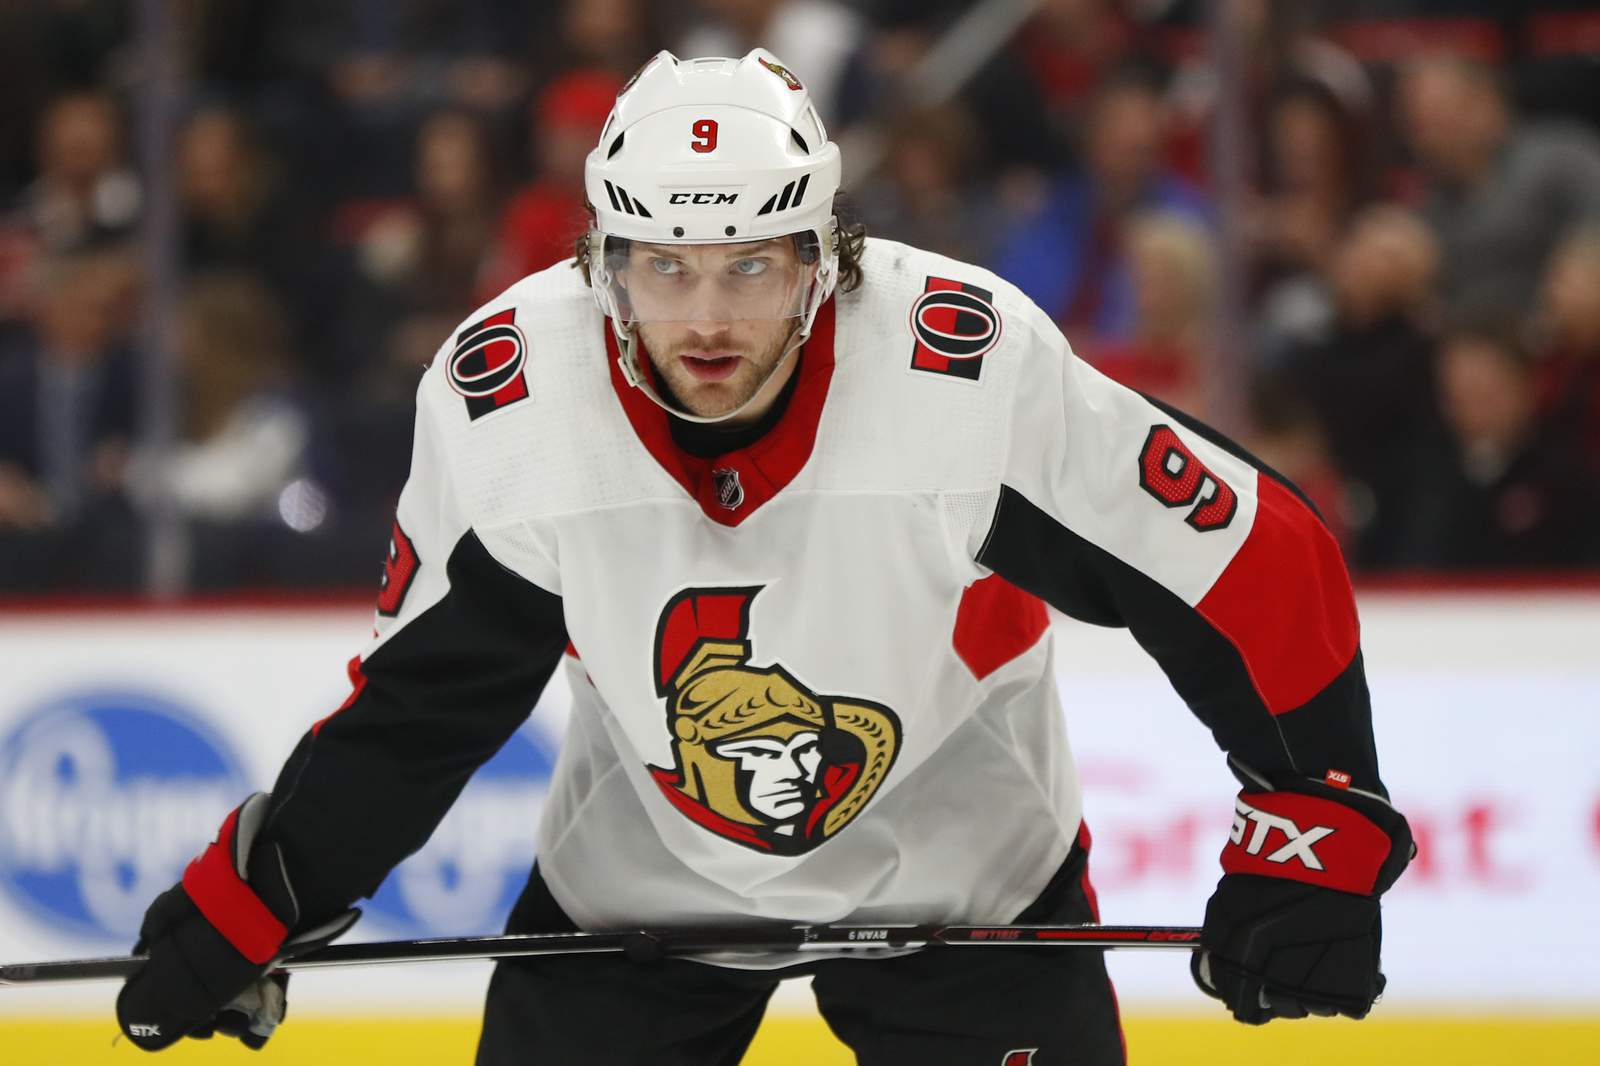 Bobby Ryan shoots to revive career with rebuilding Red Wings